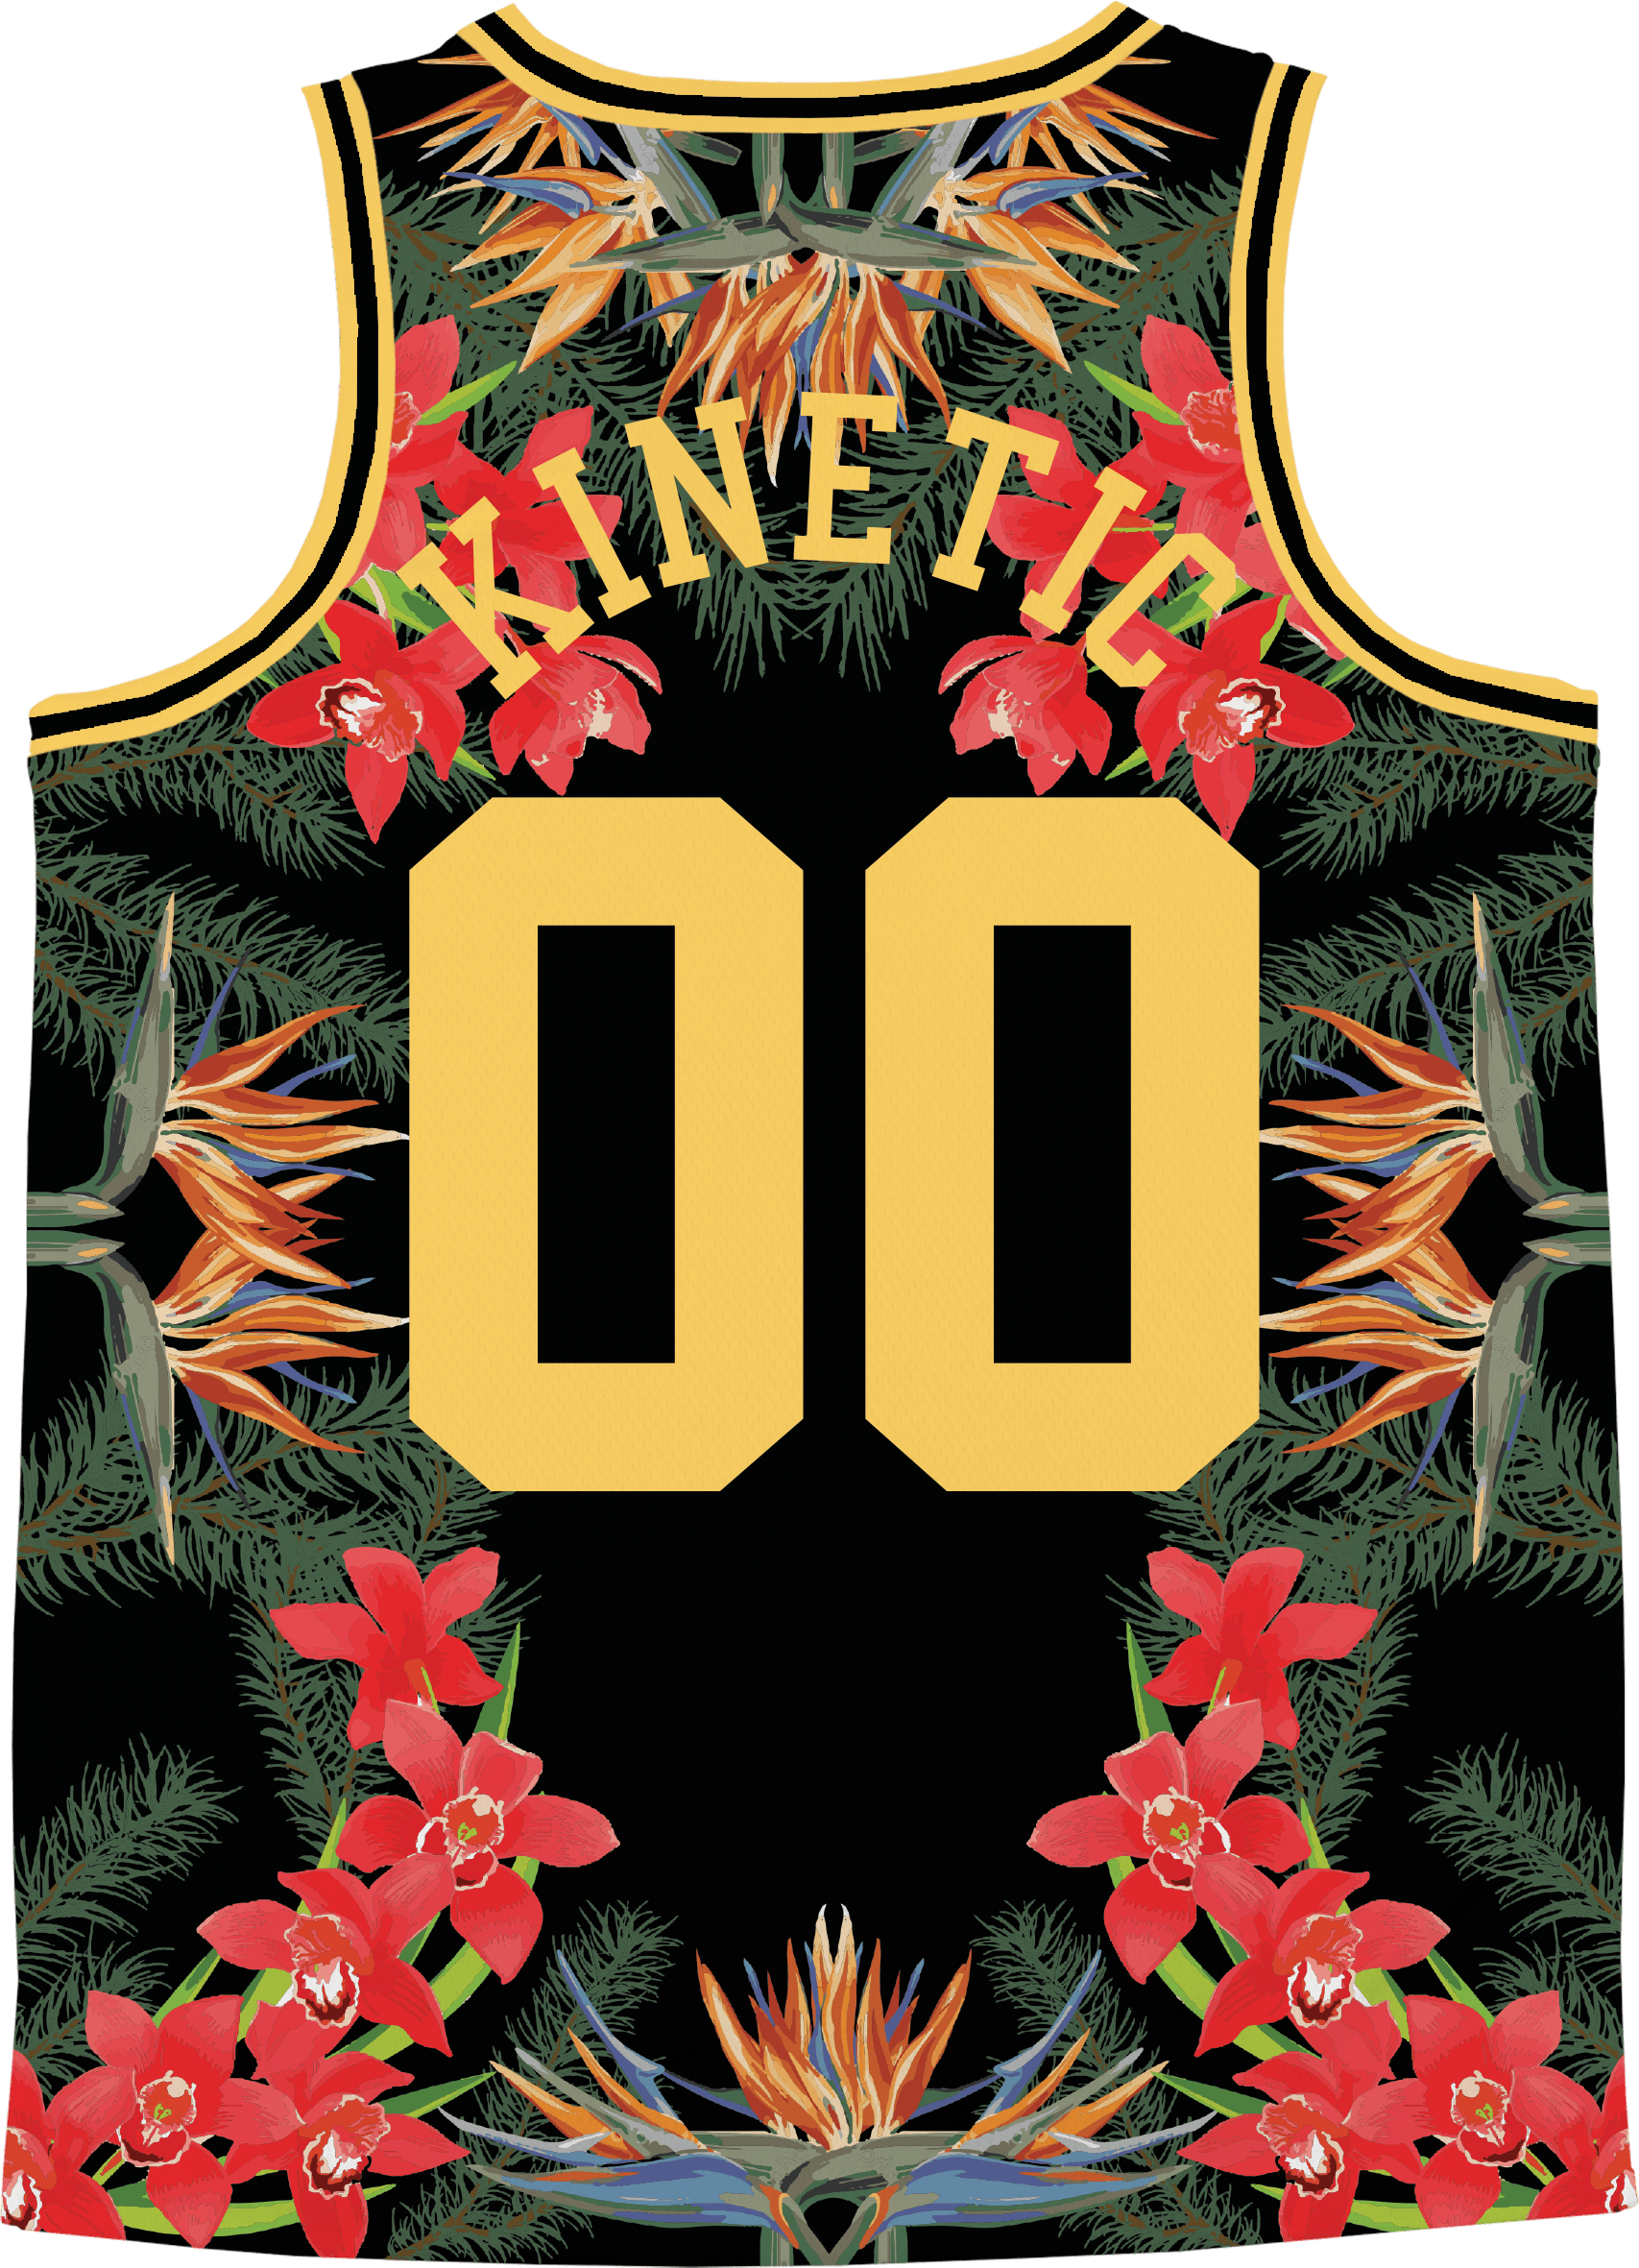 Sigma Nu - Orchid Paradise Basketball Jersey - Kinetic Society